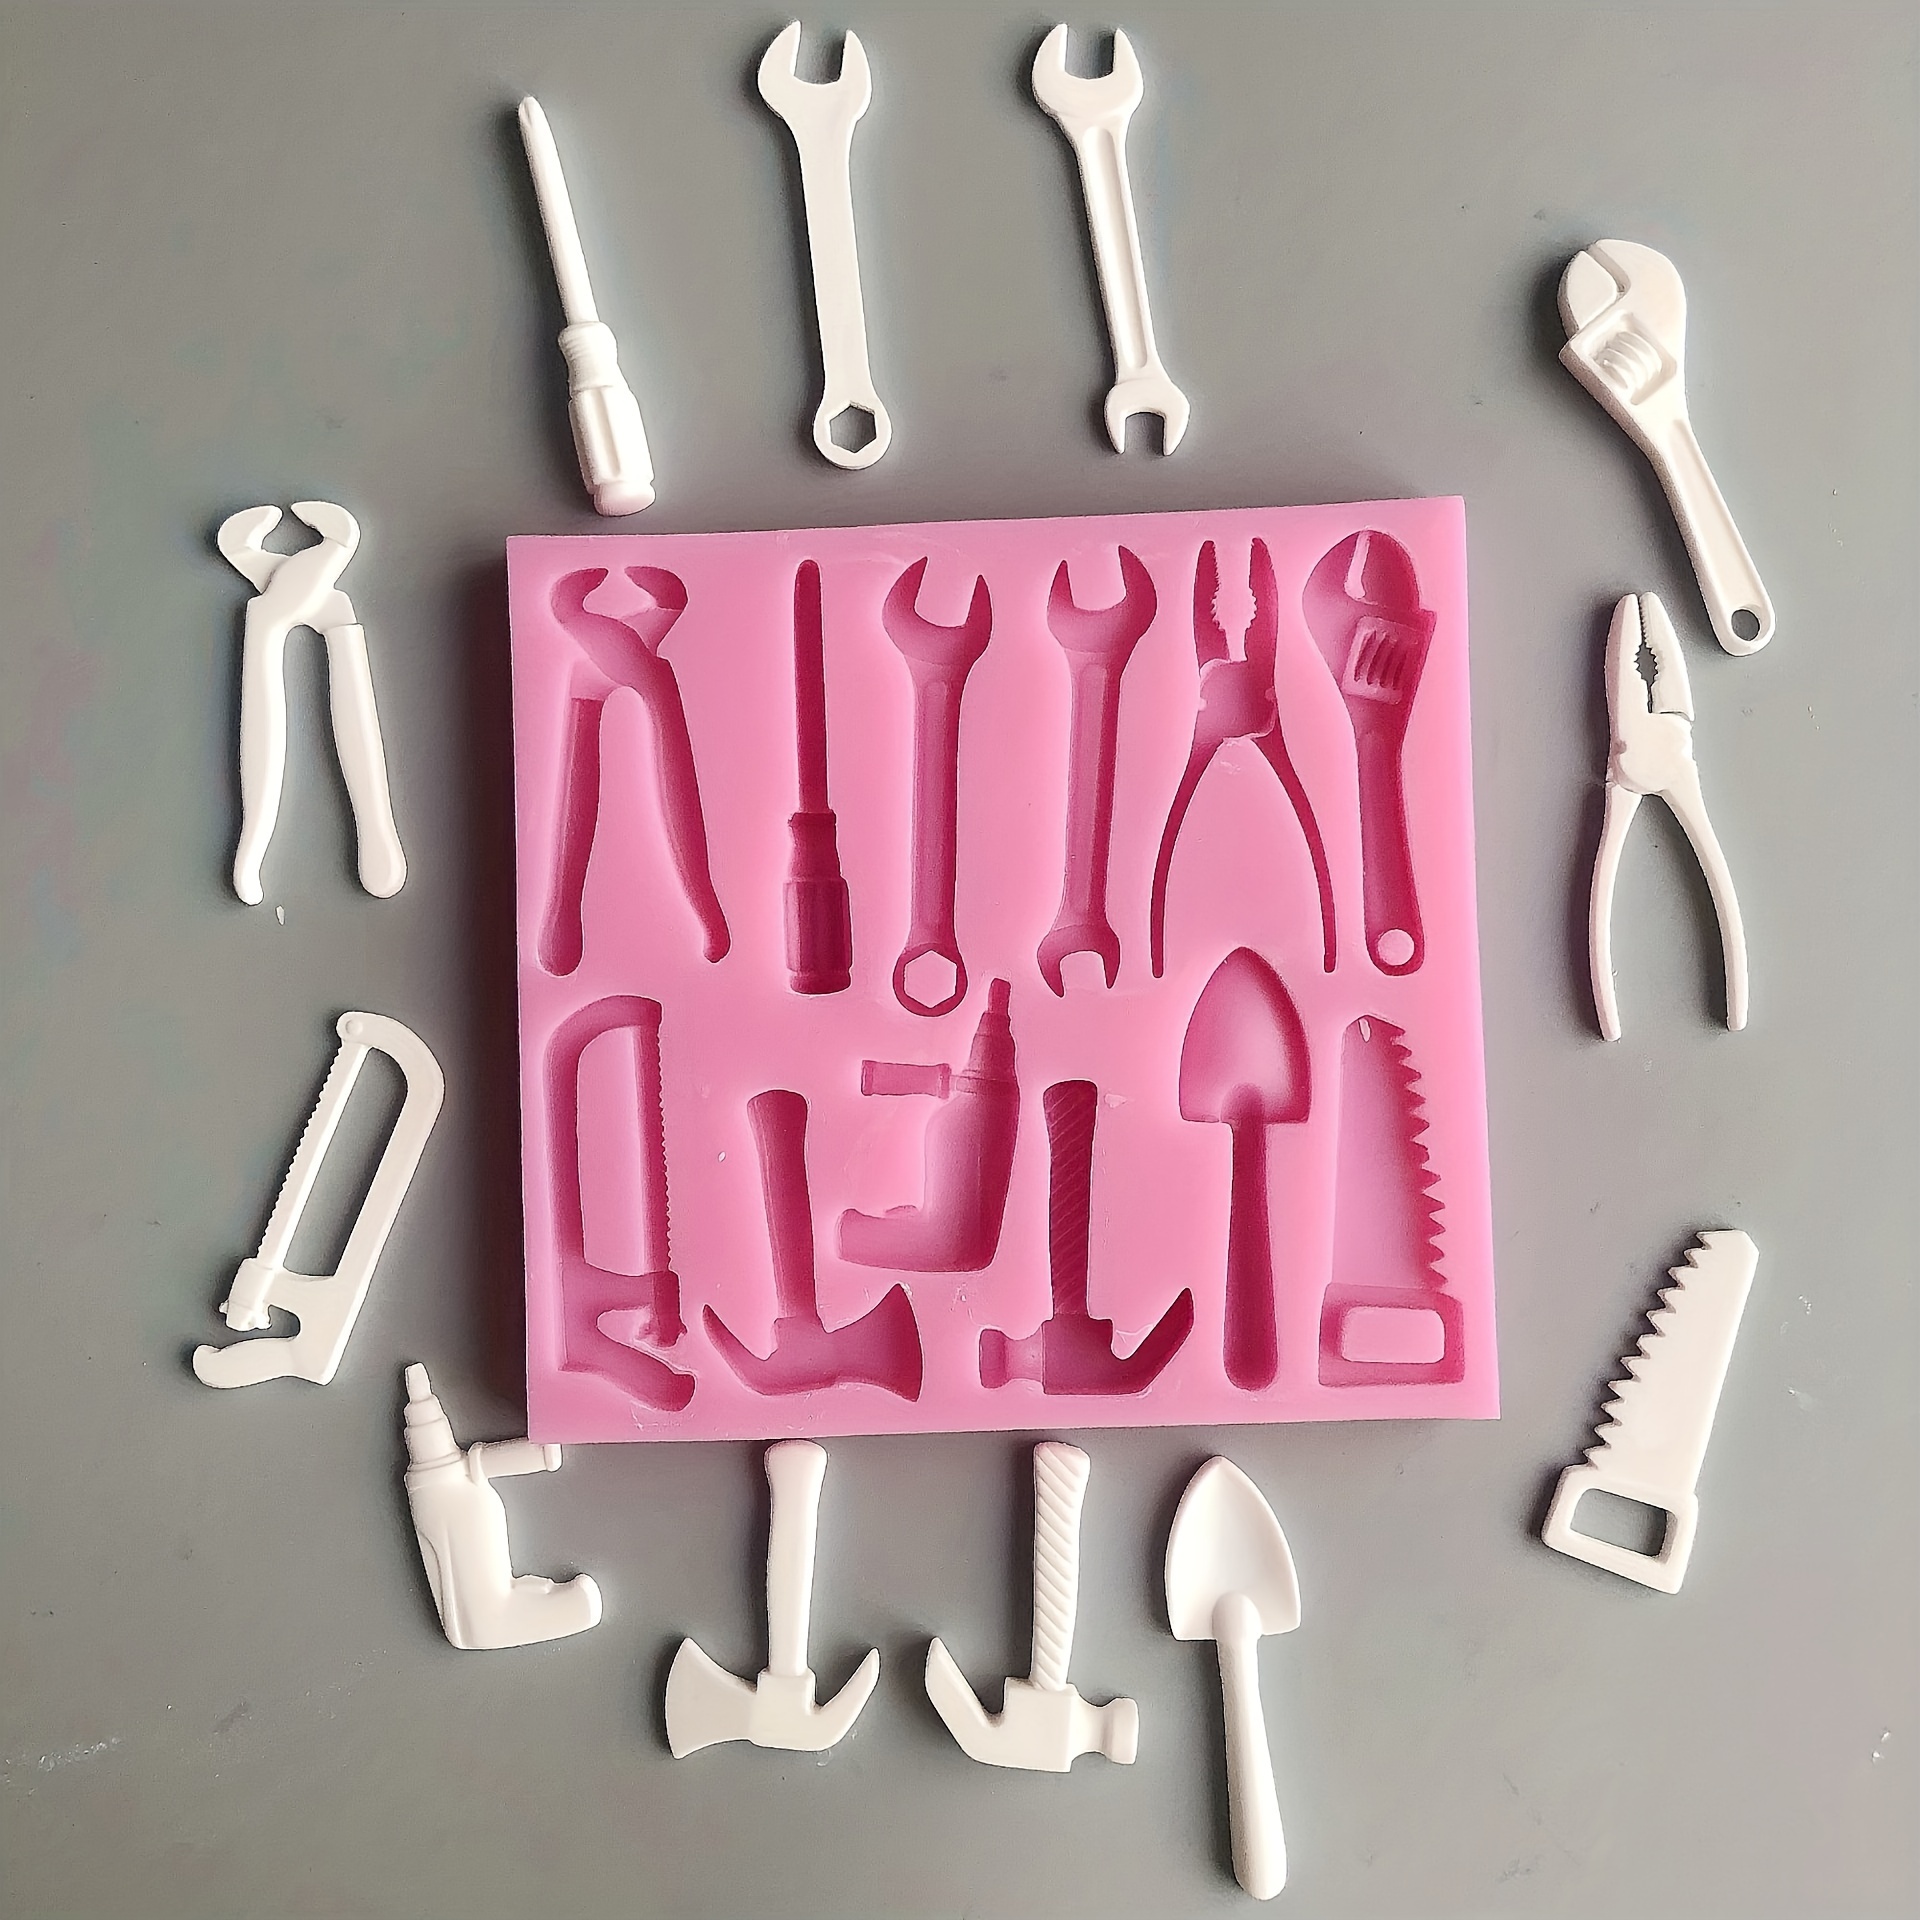 

Silicone Mold Set For Cake Decoration - Fantasy Themed Small Tools Design, Electric Drill, Shovel, Wrench, Hammer Shapes - Oval Chocolate Baking And Fondant Molds For Home Use